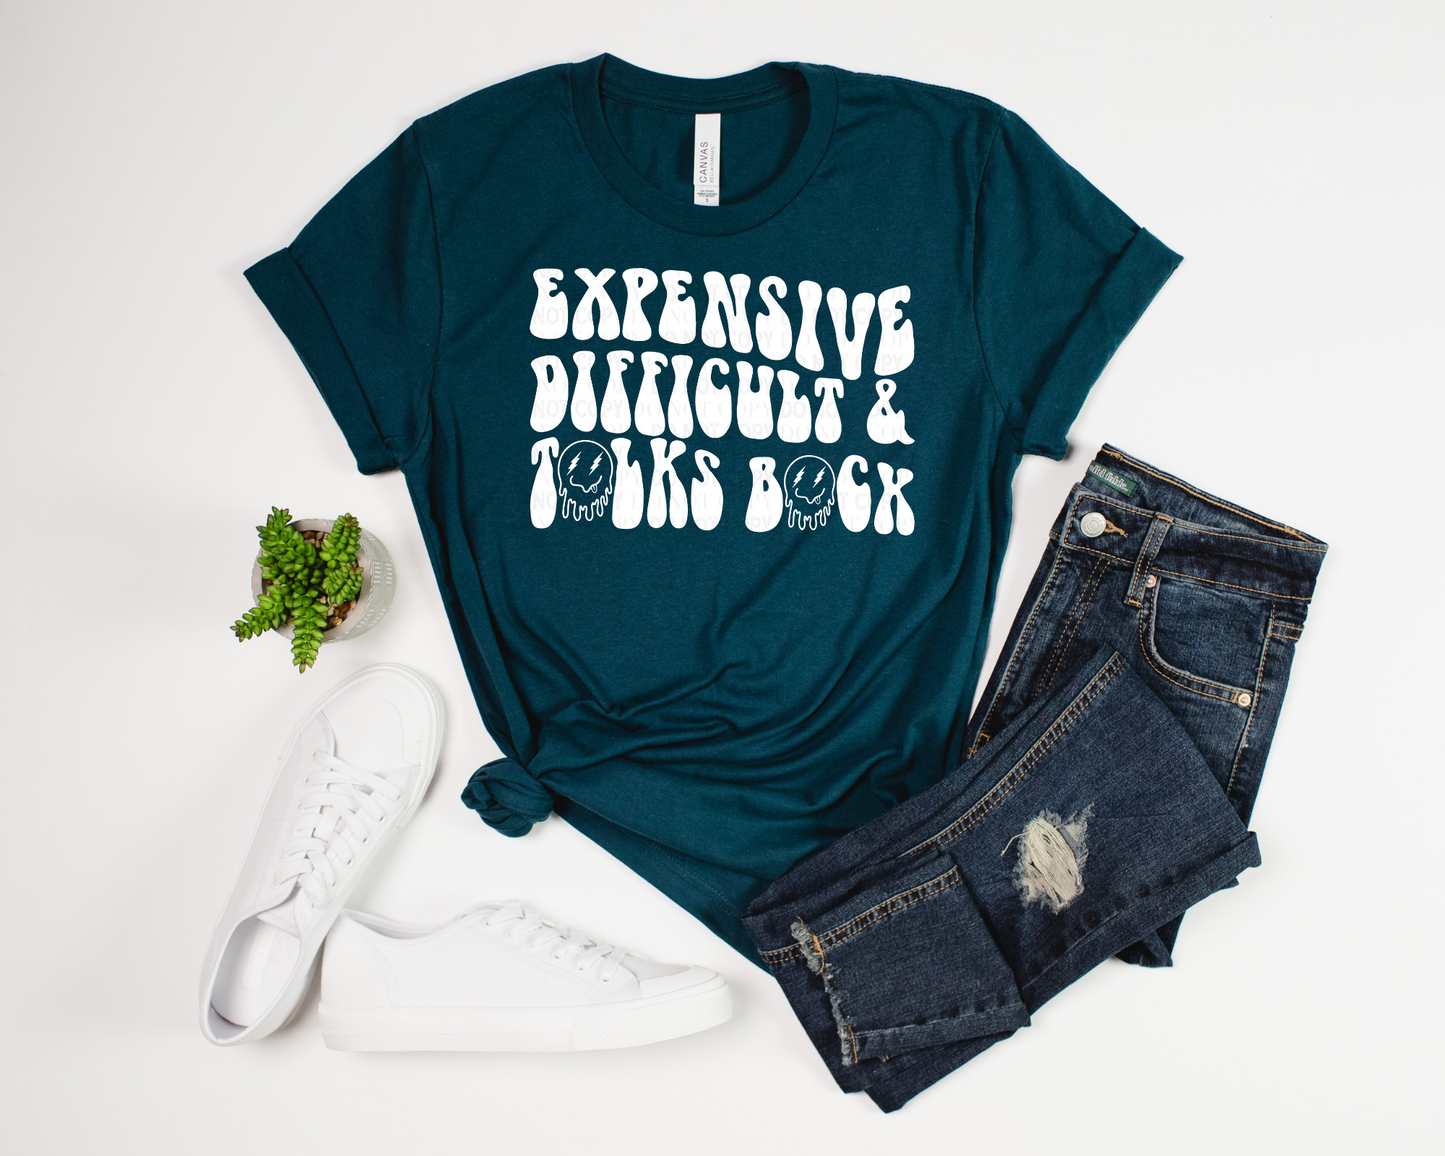 Expensive Difficult & Talks Back ~ Tee